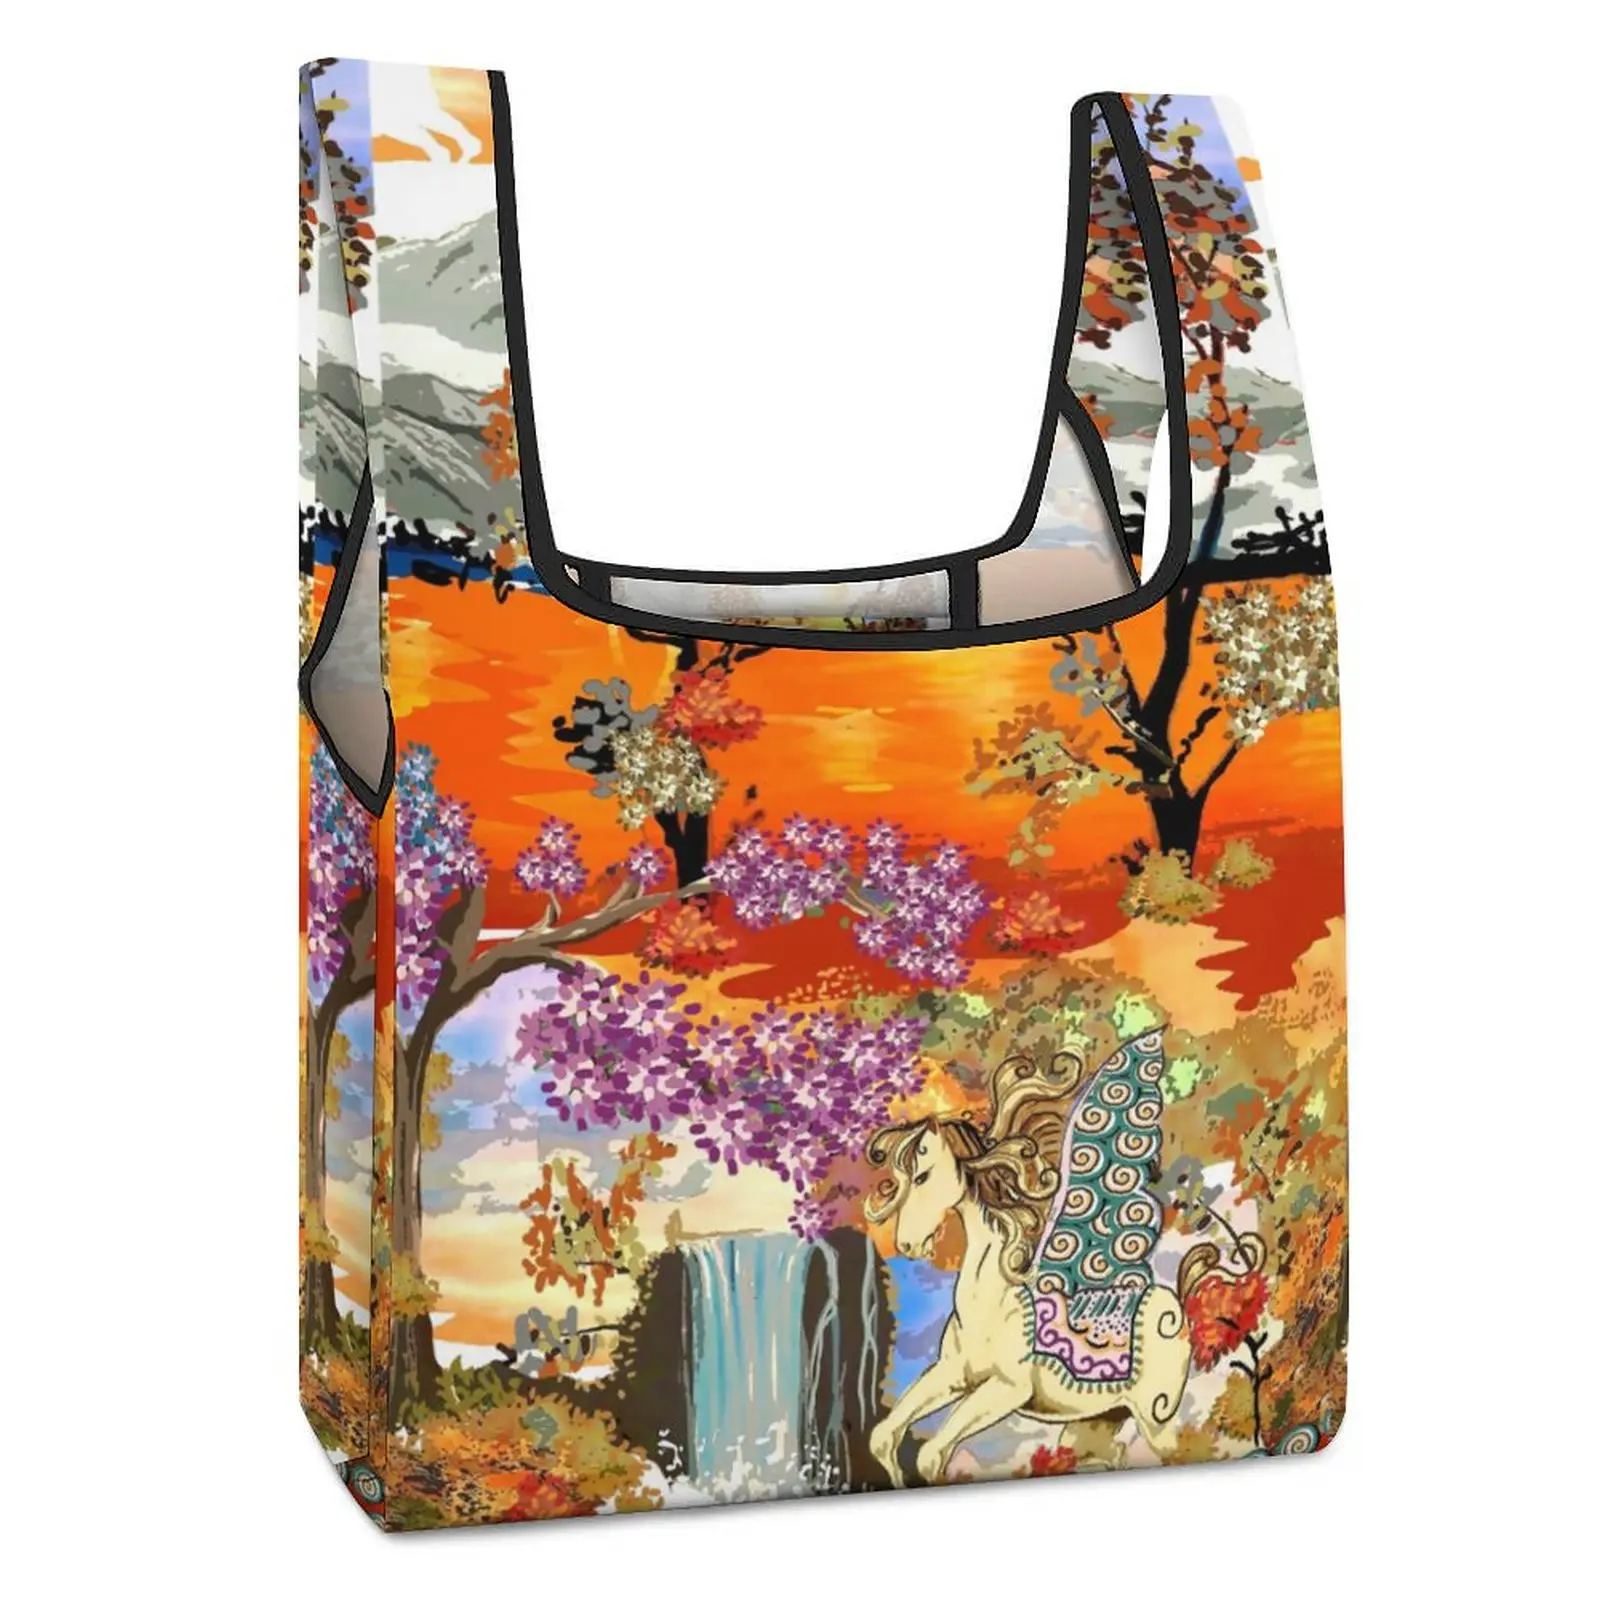 Customized Printed Collapsible Shopping Bag Double Strap Handbag Colored Printing Tote Casual Woman Grocery Bag Custom Pattern toile de jouy navy blue motif pattern grocery tote shopping animal forest floral art shoulder shopper bag big handbags